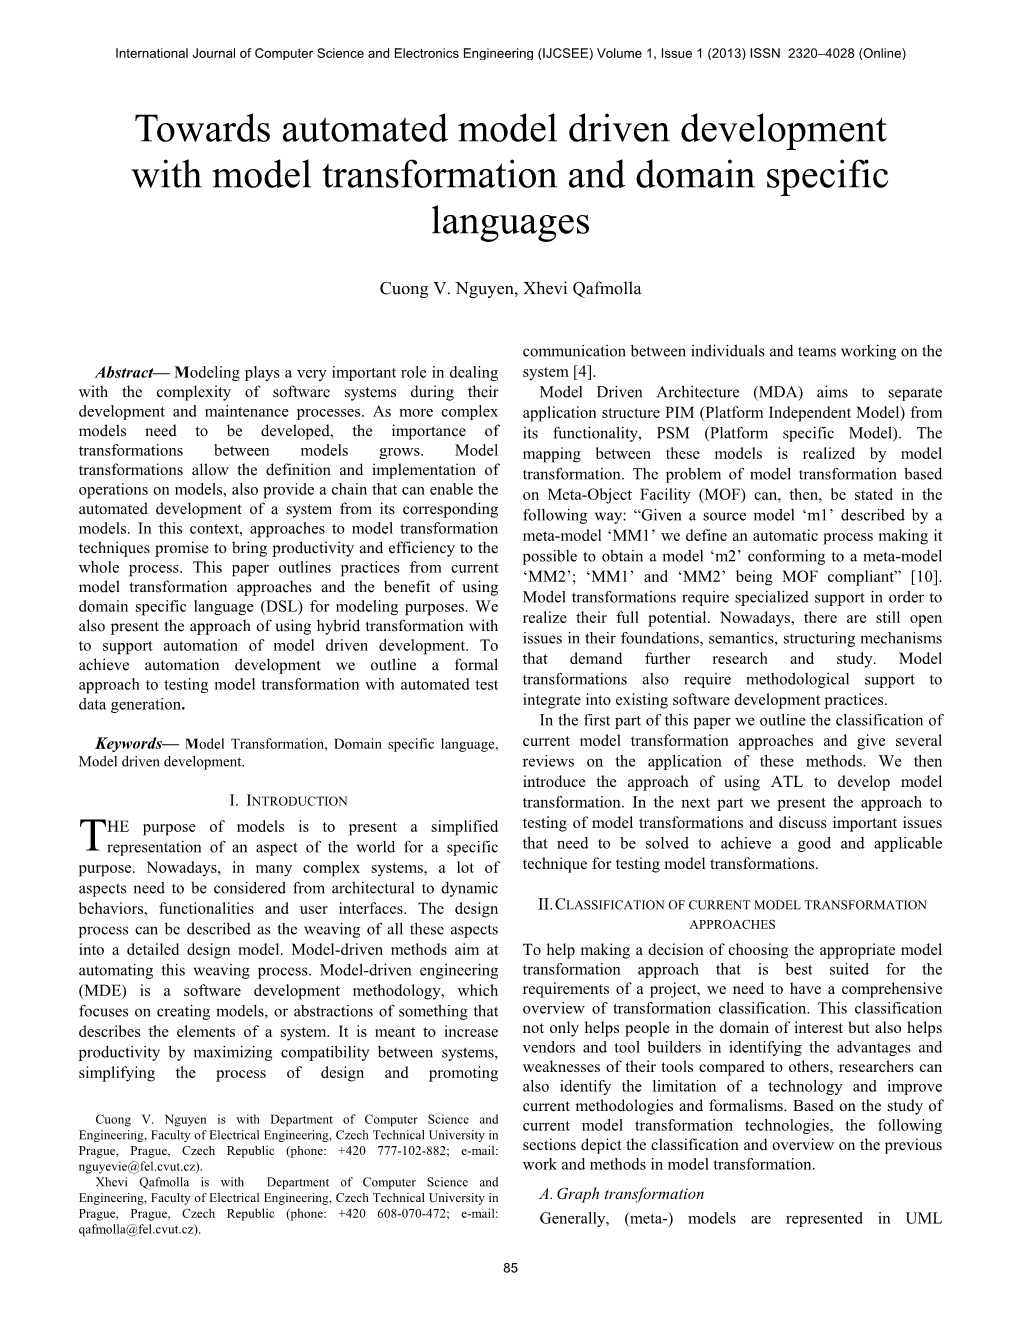 Towards Automated Model Driven Development with Model Transformation and Domain Specific Languages